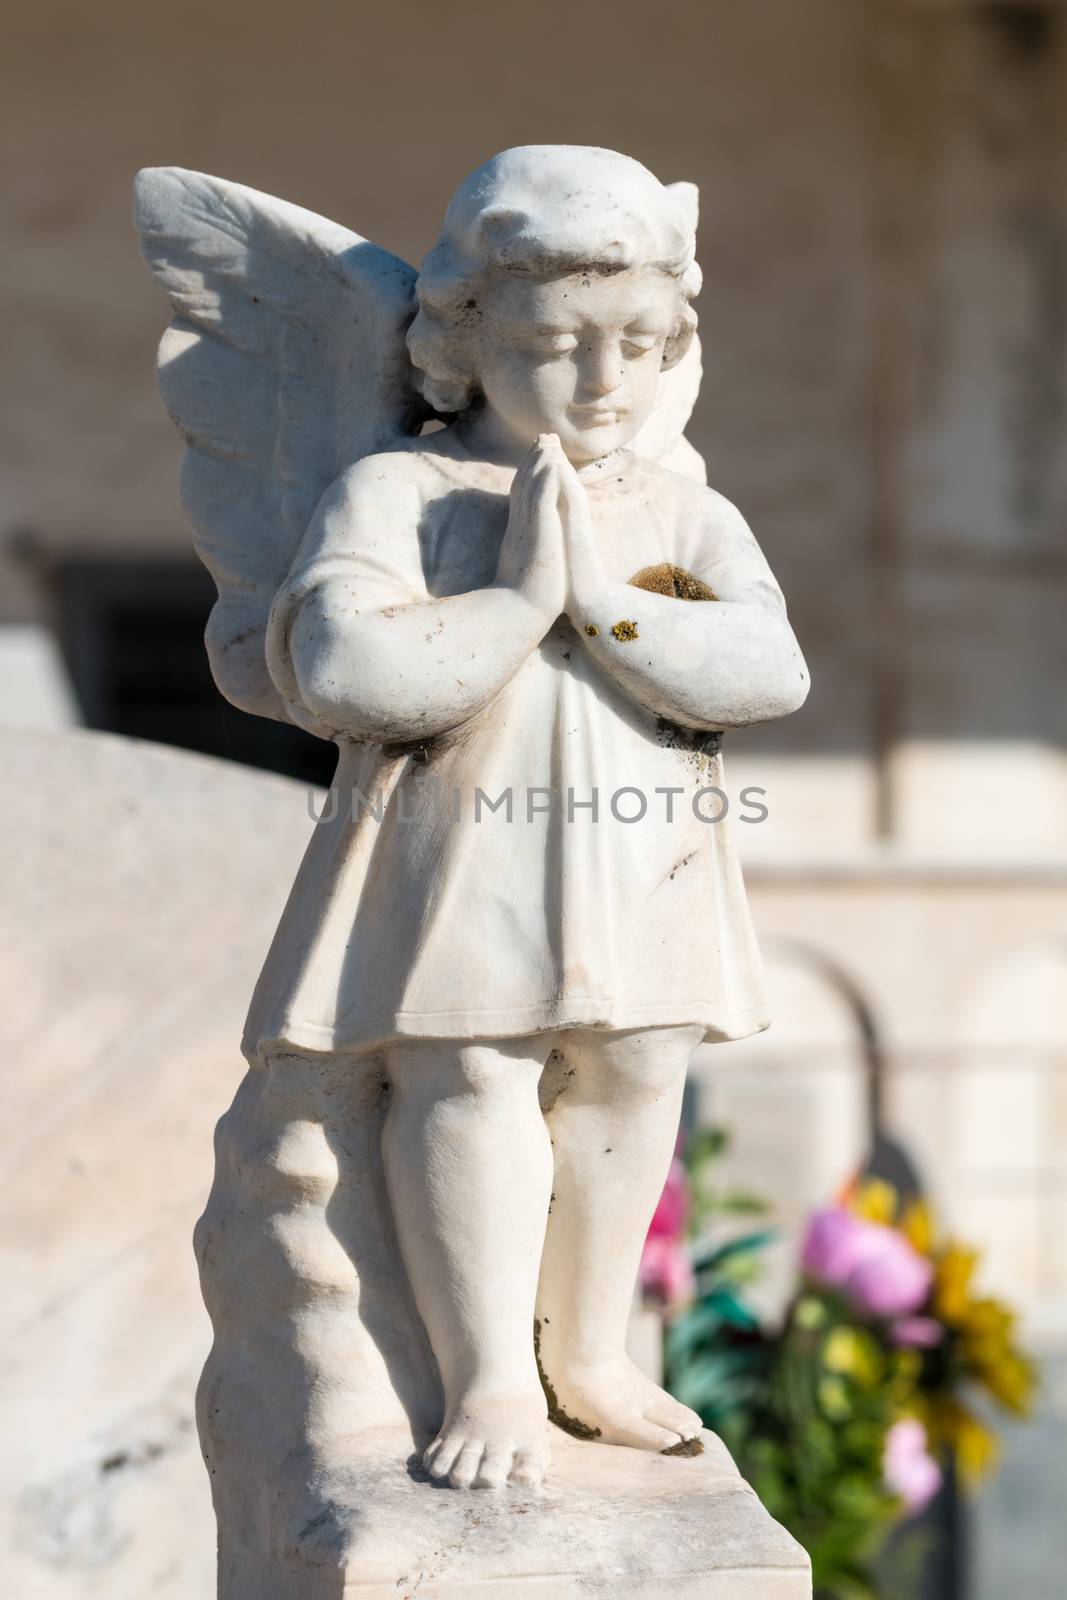 Ornamental details present on the graves of the cemeteries in Sicily